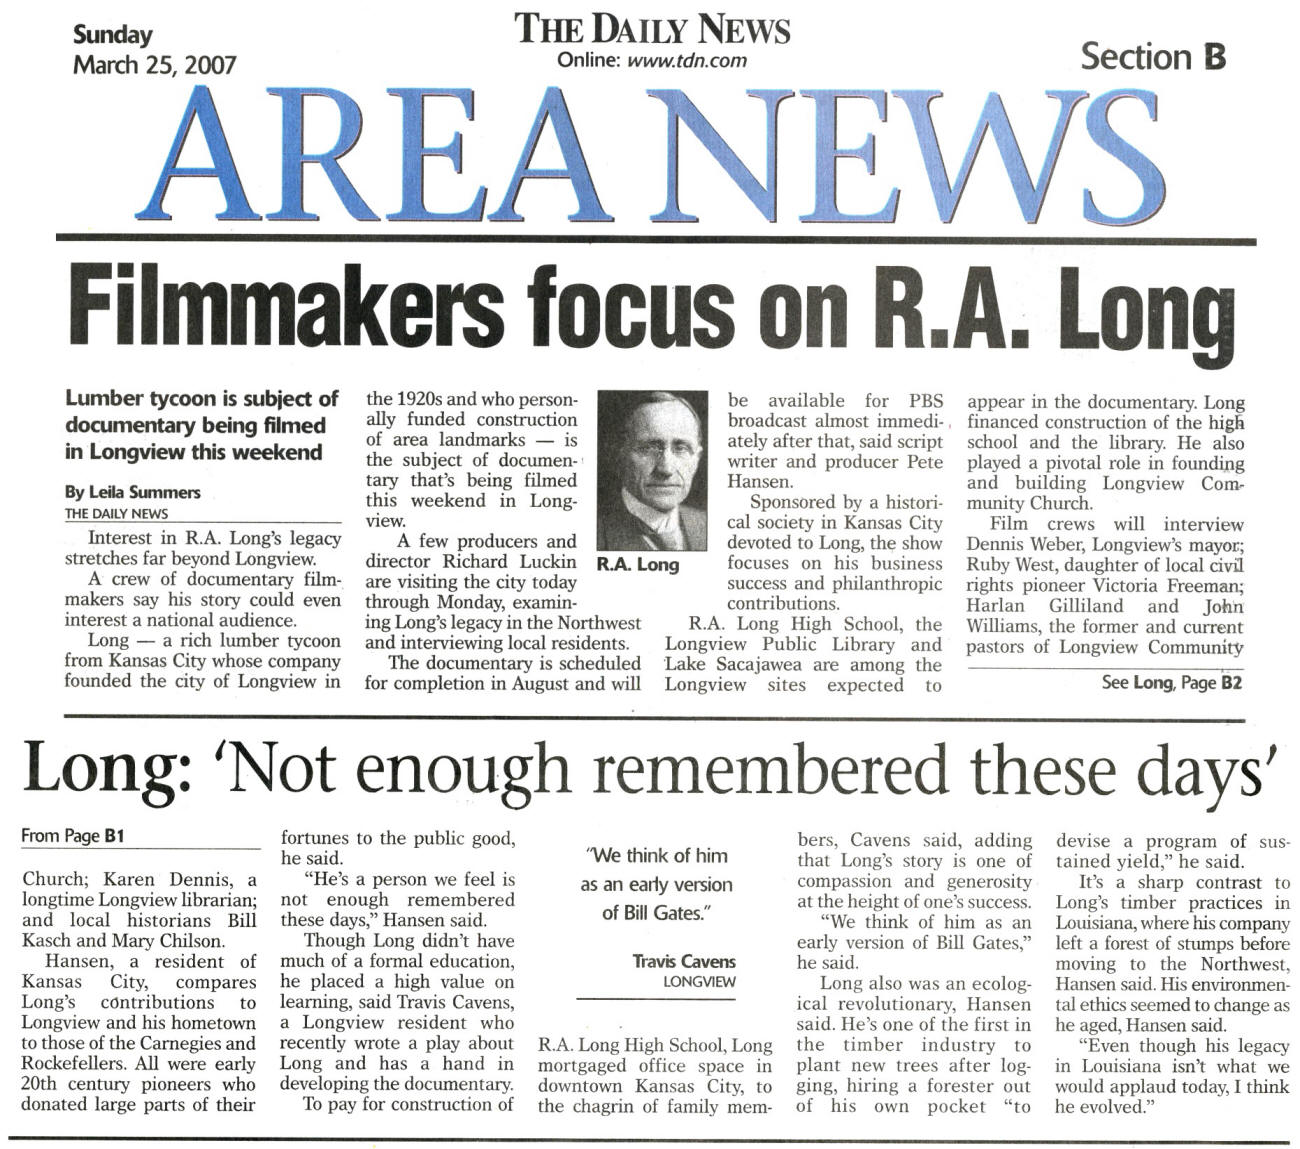 Filmmakers focus on R. A. Long